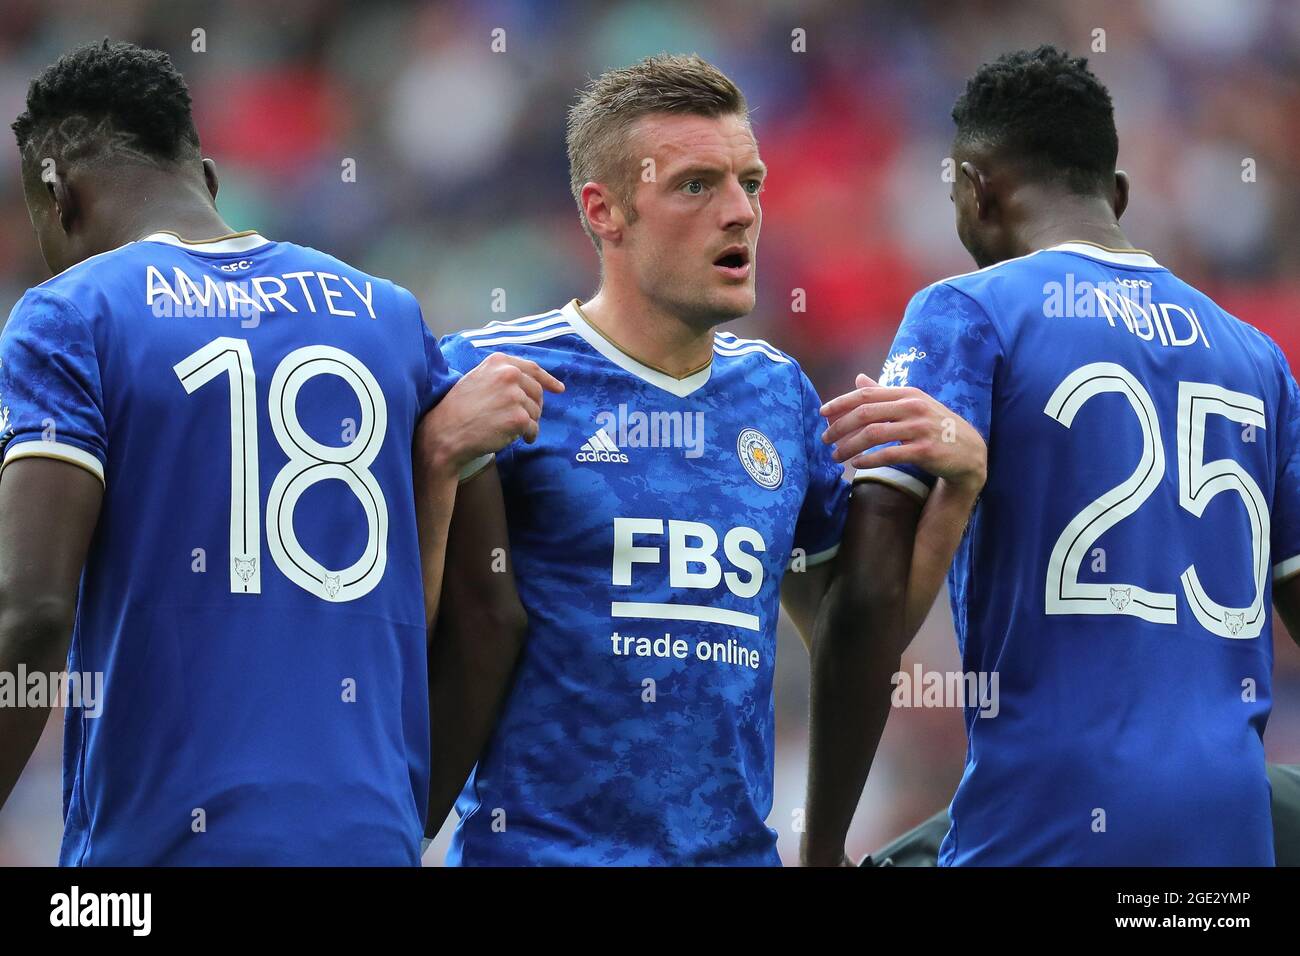 DANIEL AMARTEY, JAMIE VARDY, WILFRED NDIDI, LEICESTER CITY V MANCHESTER CITY, 2021 Stock Photo